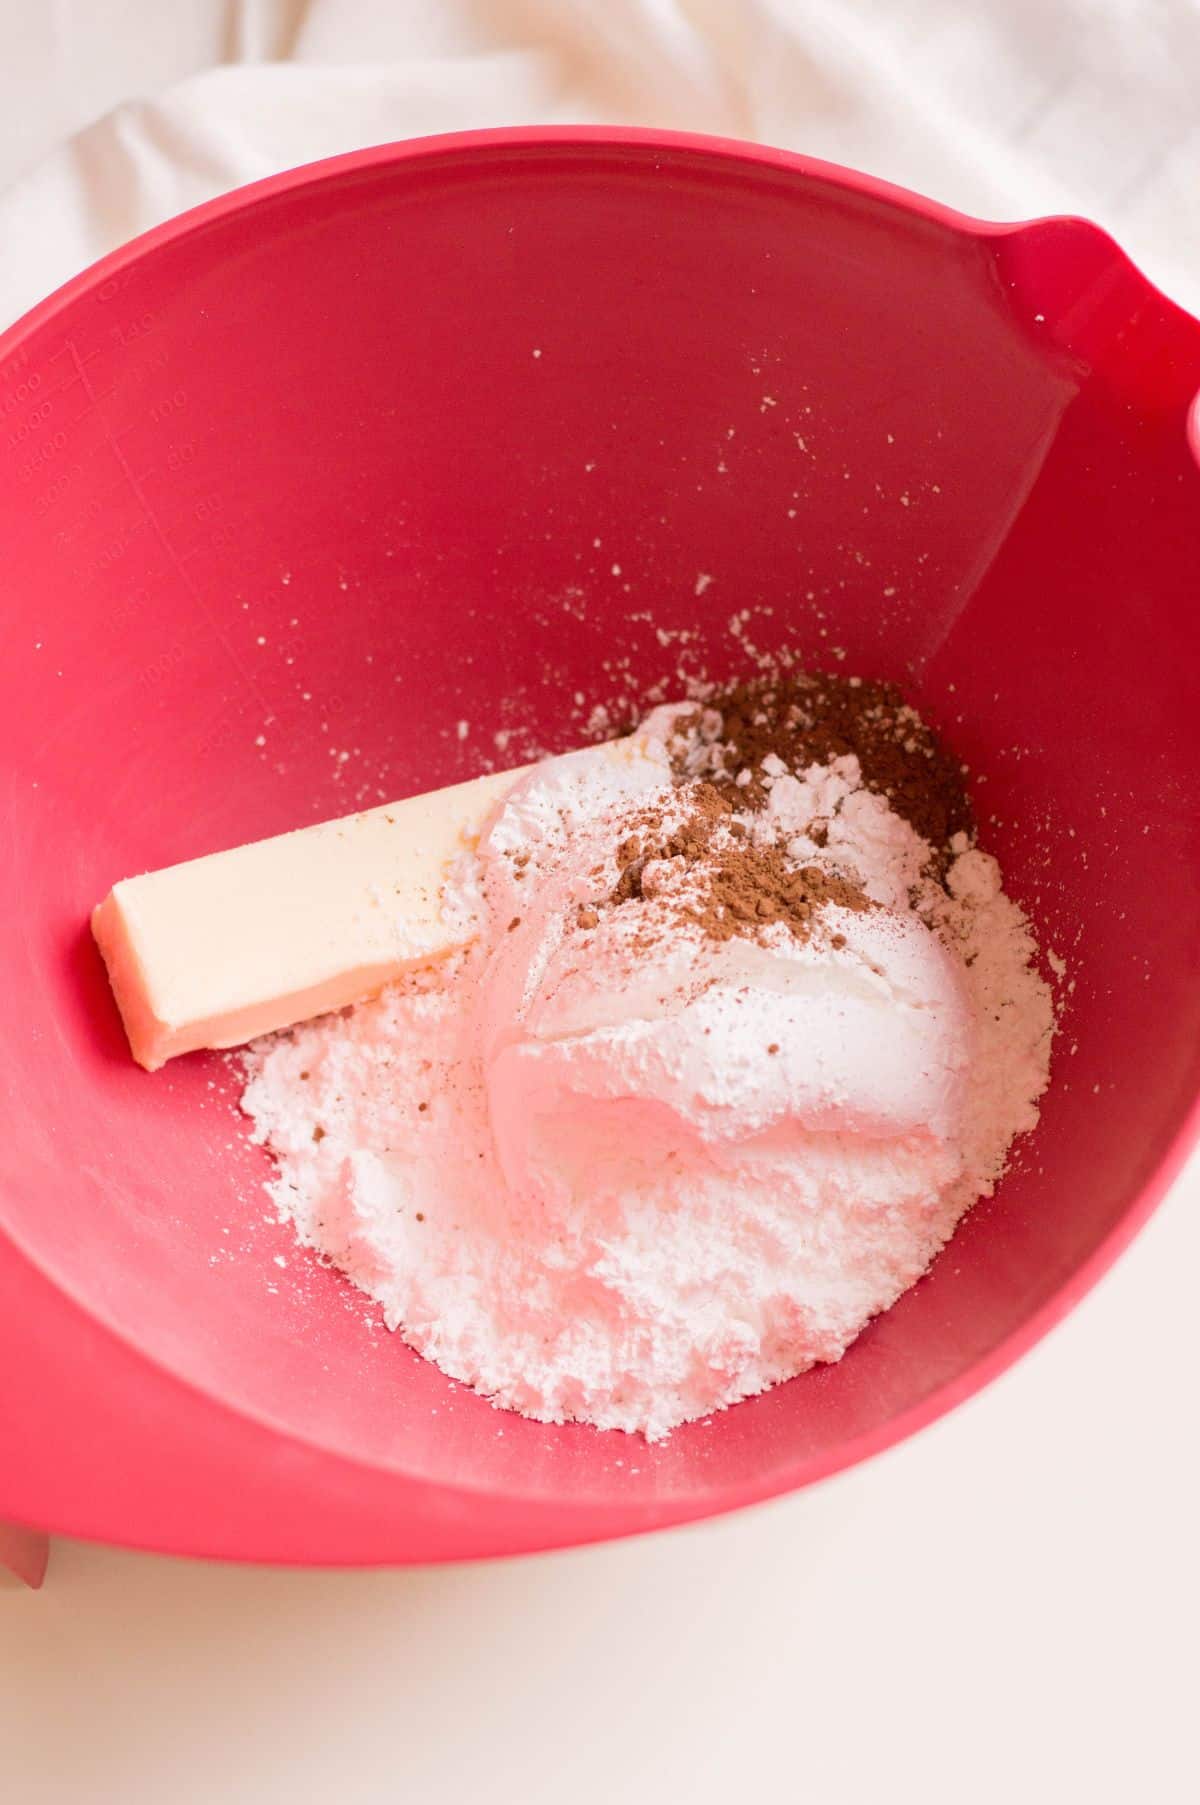 Butter, confectioners’ sugar, cocoa powder, and milk in a large red bowl.